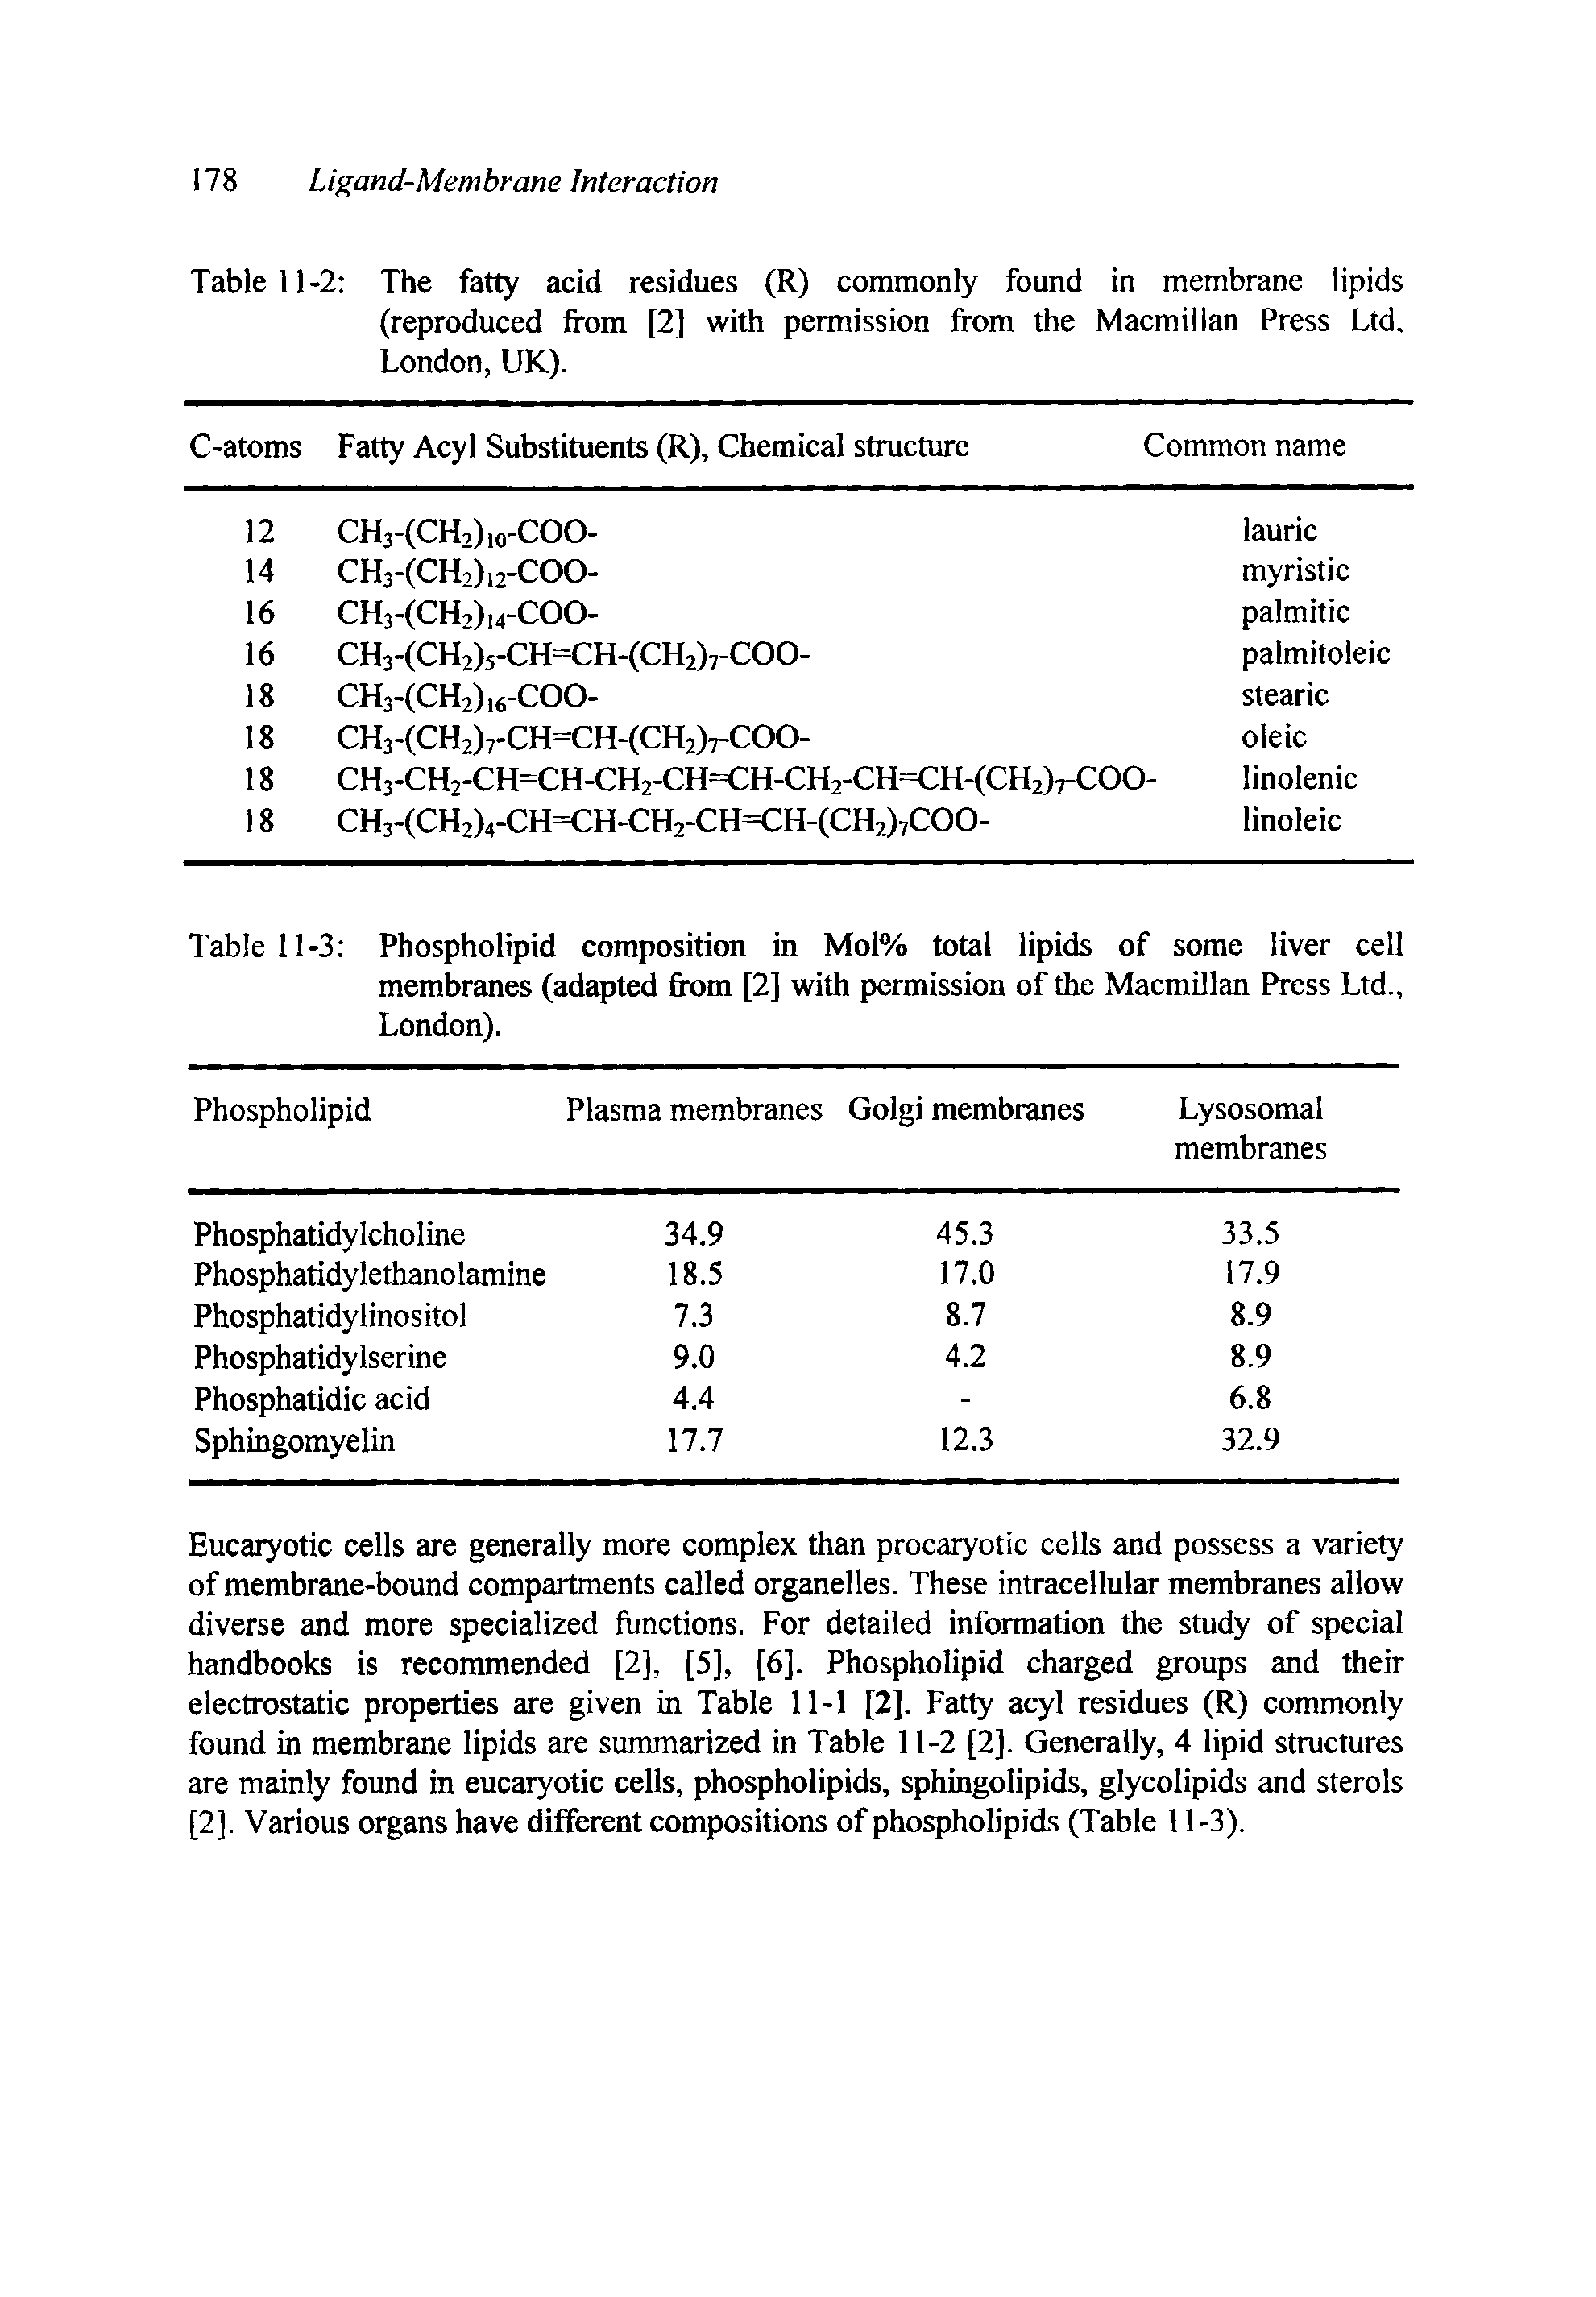 Table 11-3 Phospholipid composition in Mol% total lipids of some liver cell membranes (adapted from [2] with permission of the Macmillan Press Ltd., London).